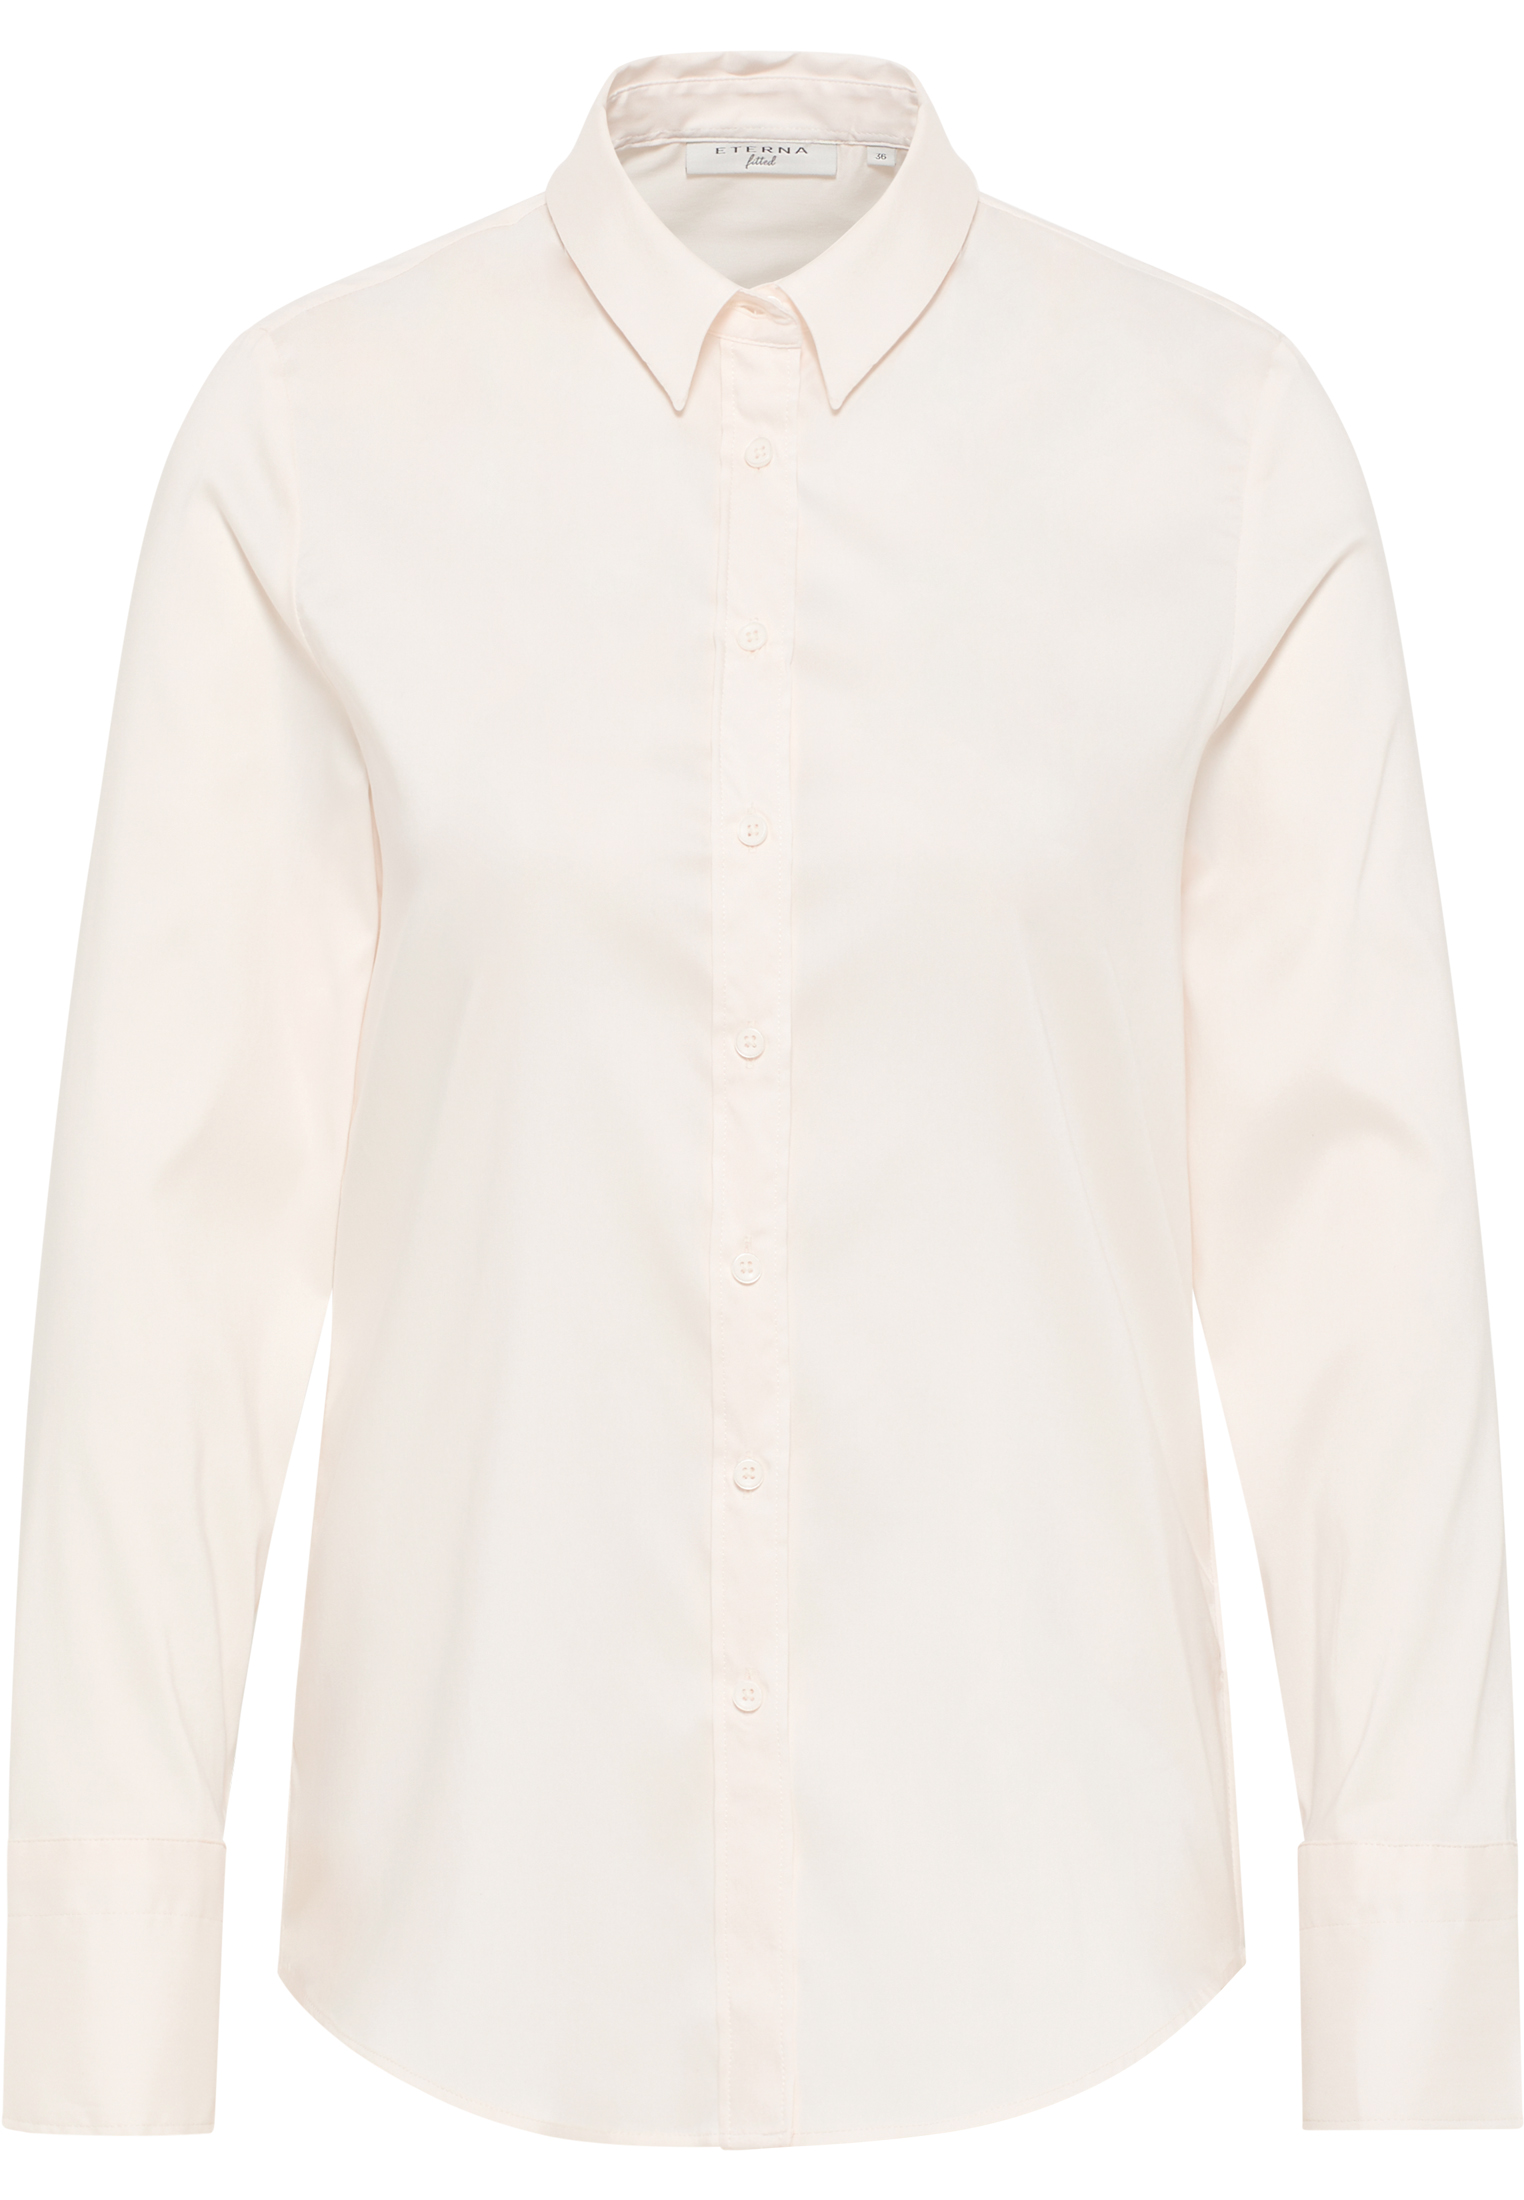 Langarm unifarben Bluse 38 in Performance | 2BL00441-00-02-38-1/1 off-white | | off-white | Shirt